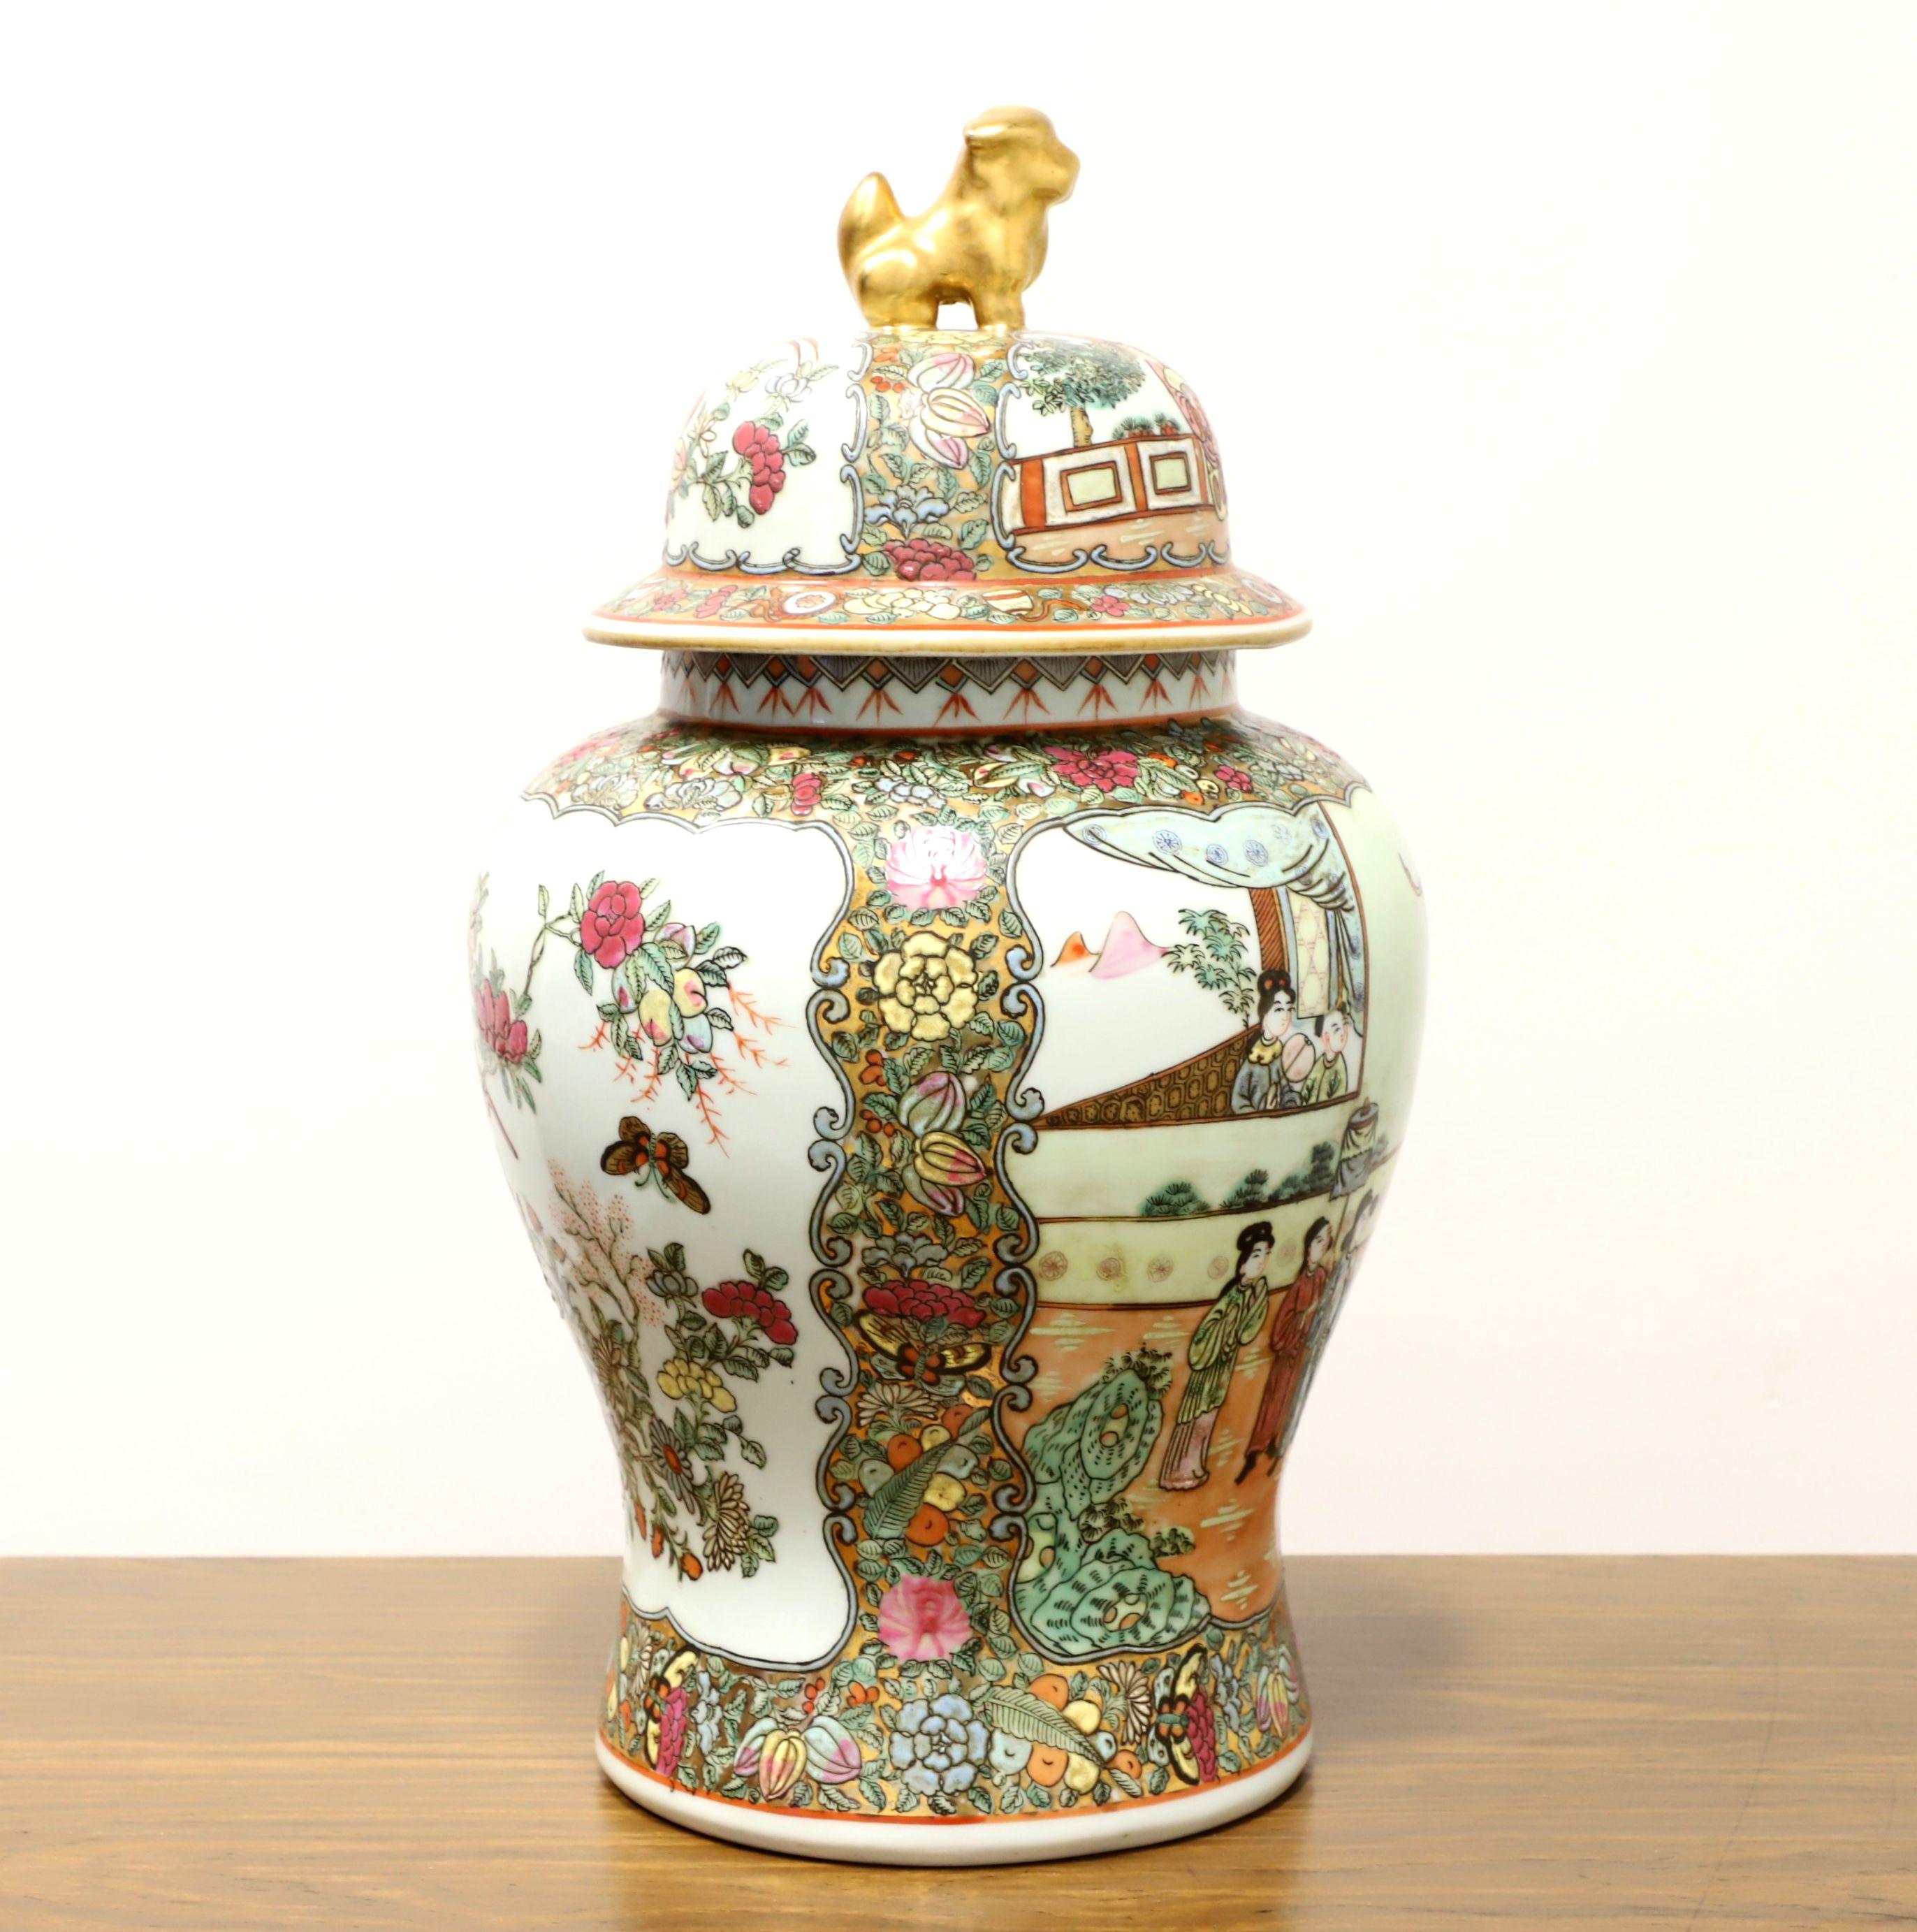 An Asian chinoiserie style ginger jar with lid, unbranded. fine porcelain body, hand painted with a multi-color chinoiserie scene and a tiny gold painted dog to form the handle for lid. Made in China, in the mid 20th century.

Measures: 11w 11d